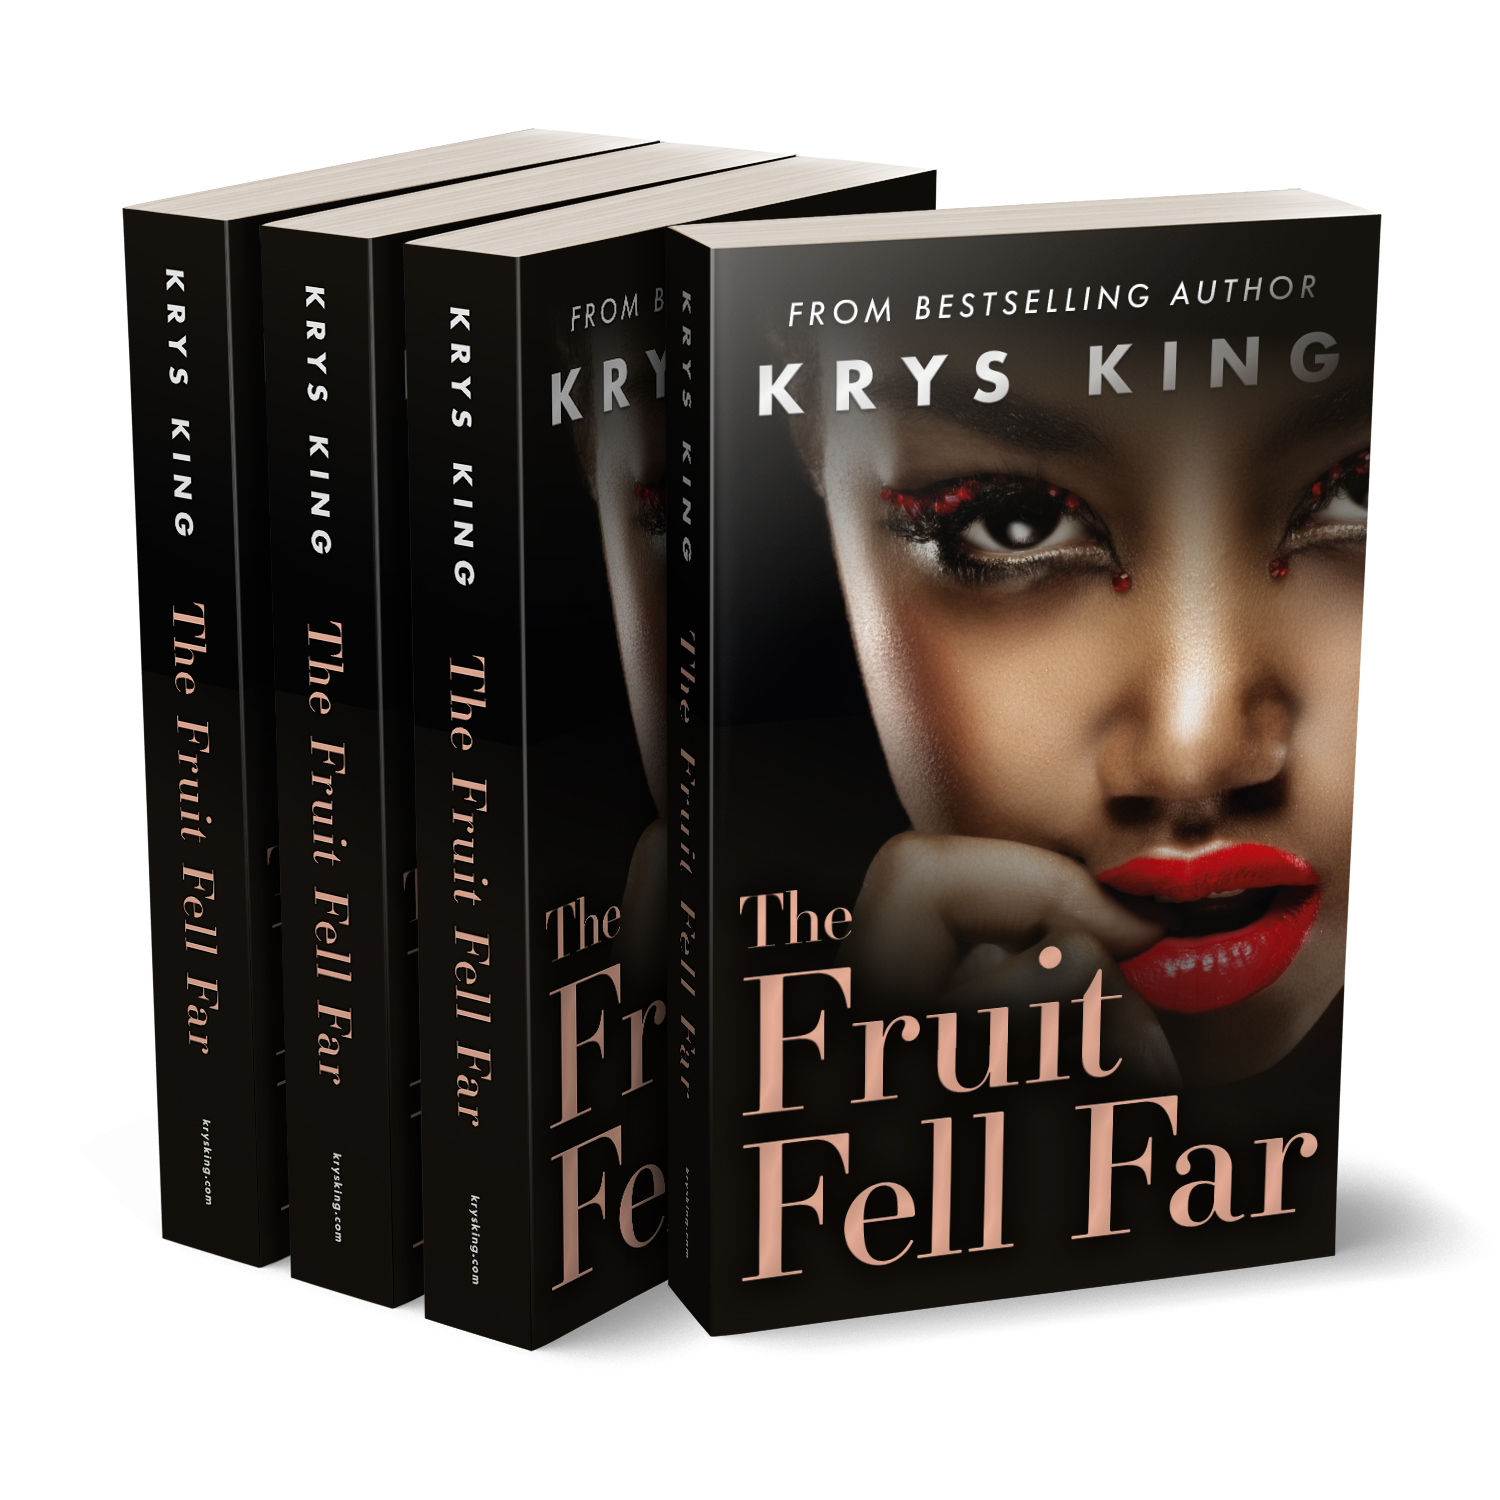 'The Fruit Fell Far' is a steamy modern novel, by author Krys King. The book cover was designed by Mark Thomas, of coverness.com. To find out more about my book design services, please visit www.coverness.com.